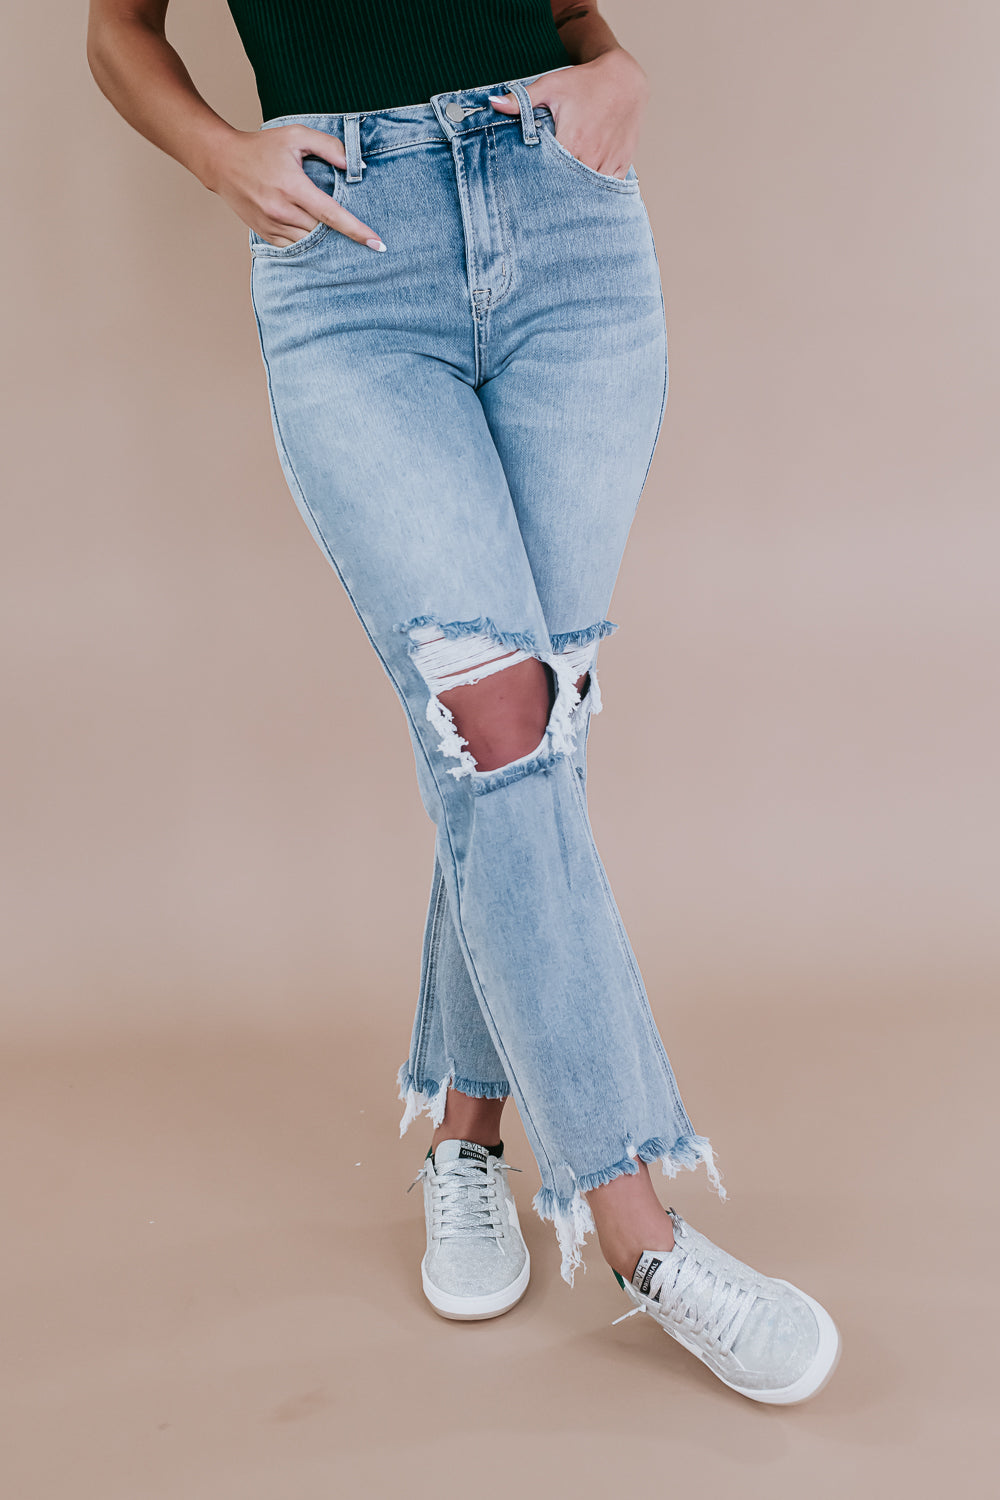 Extreme Ripped Jeans - Shop on Pinterest